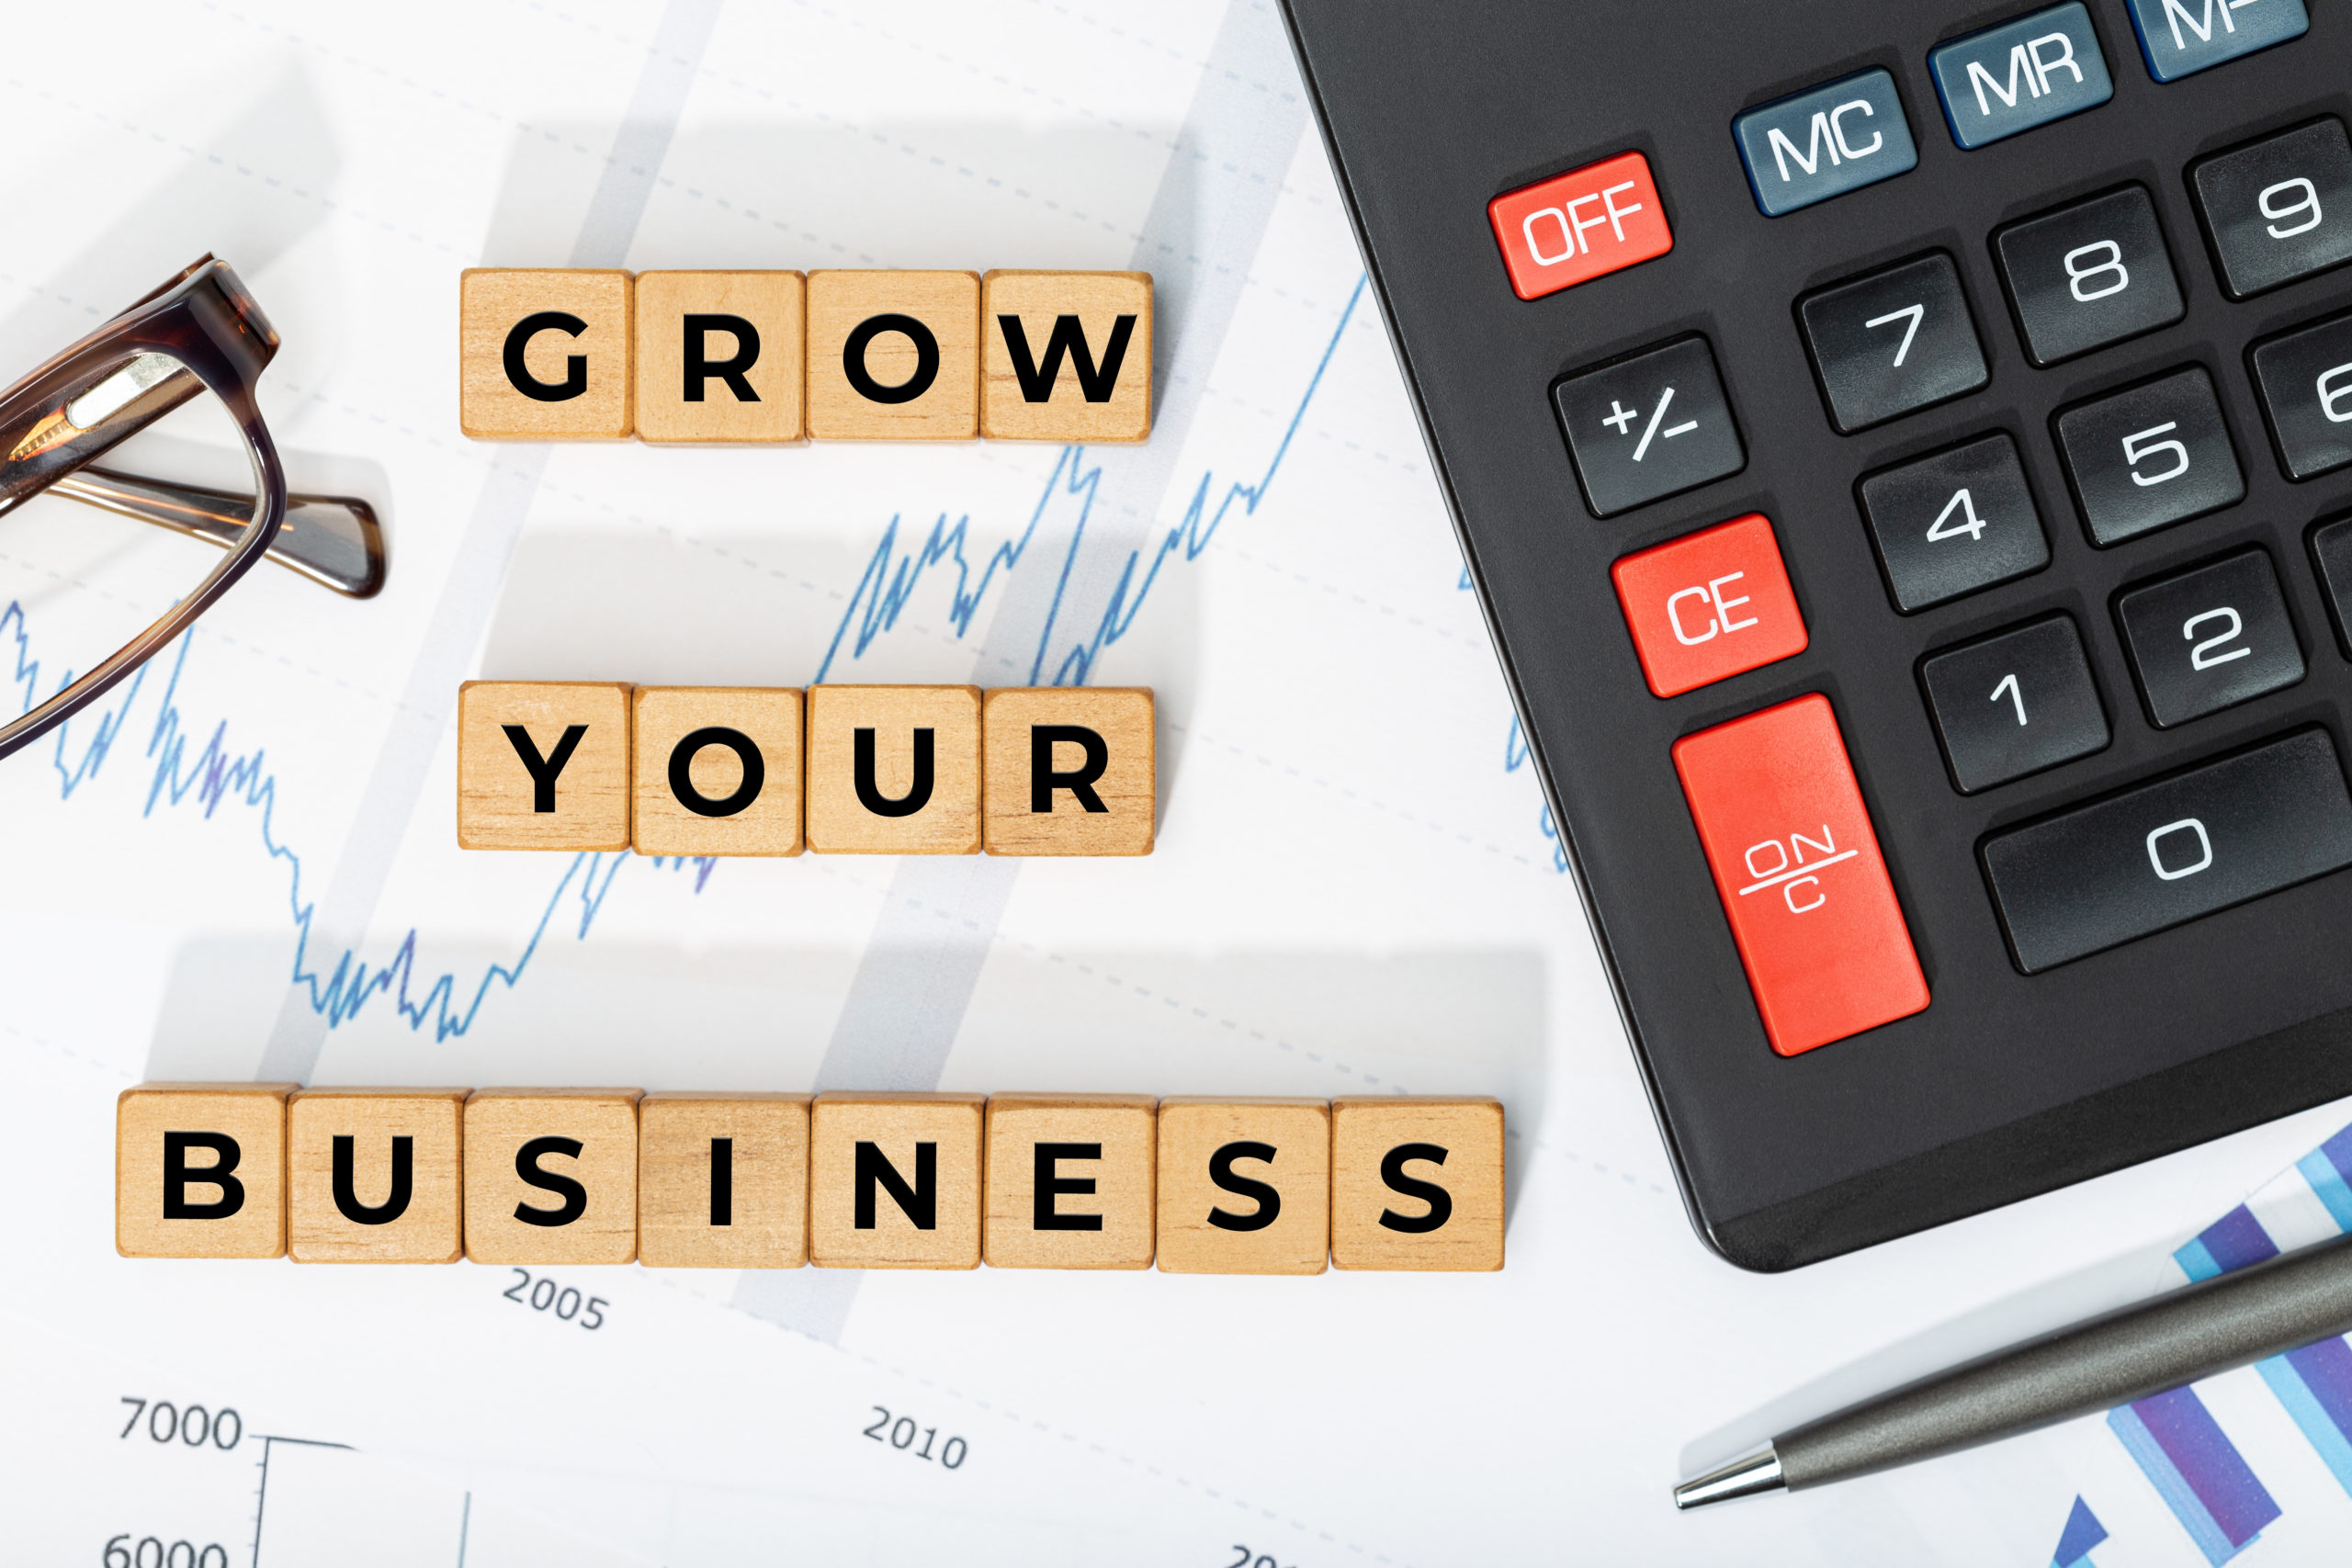 Grow your business concept. Wooden blocks with phrase, calculator and printed chars